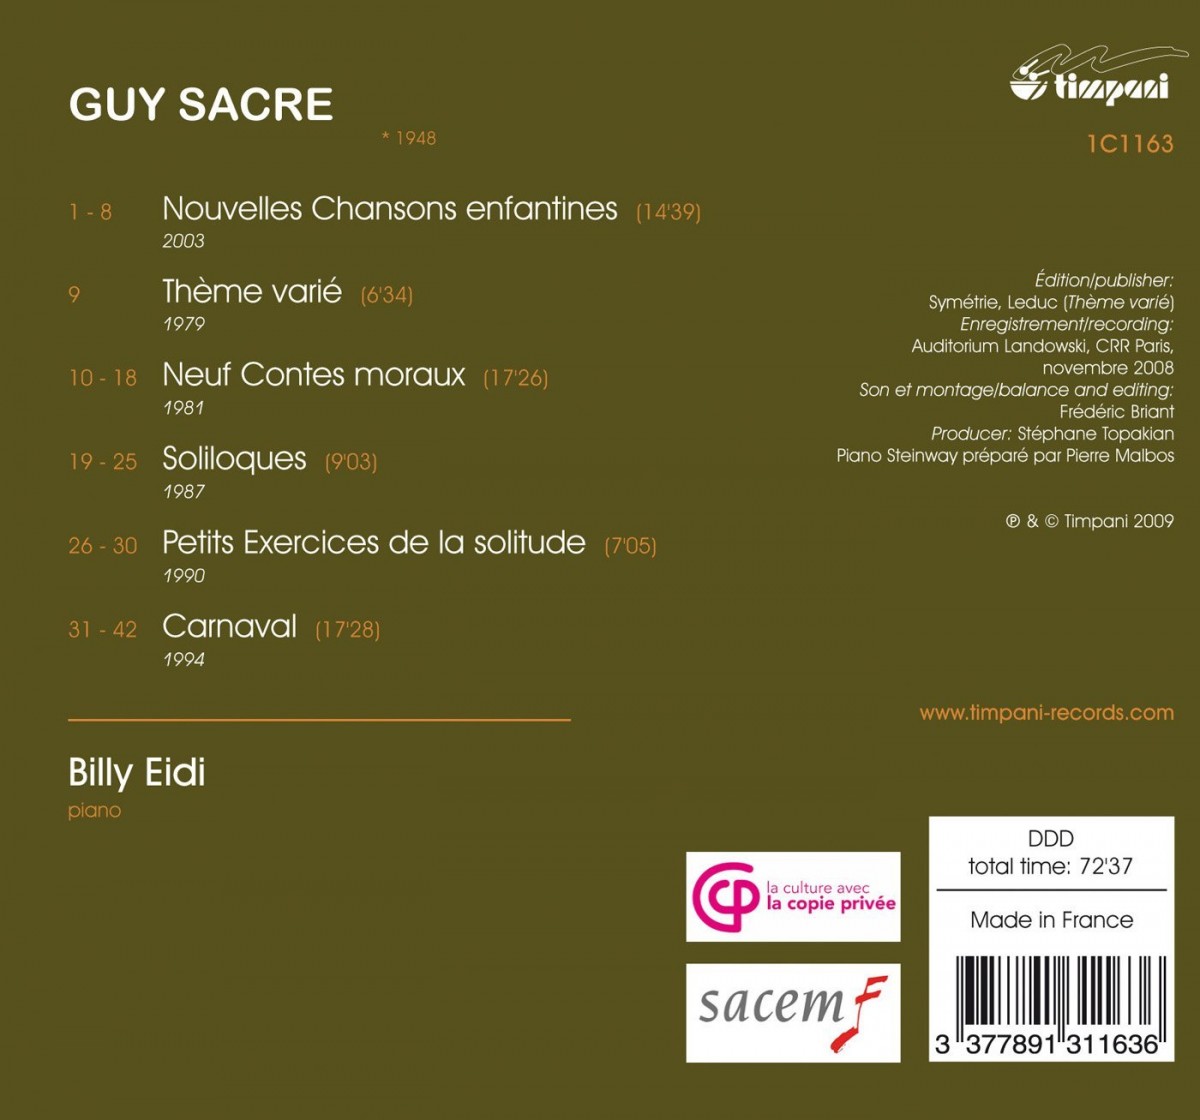 SACRE Guy, oeuvres pianistiques, vol 2, 2009